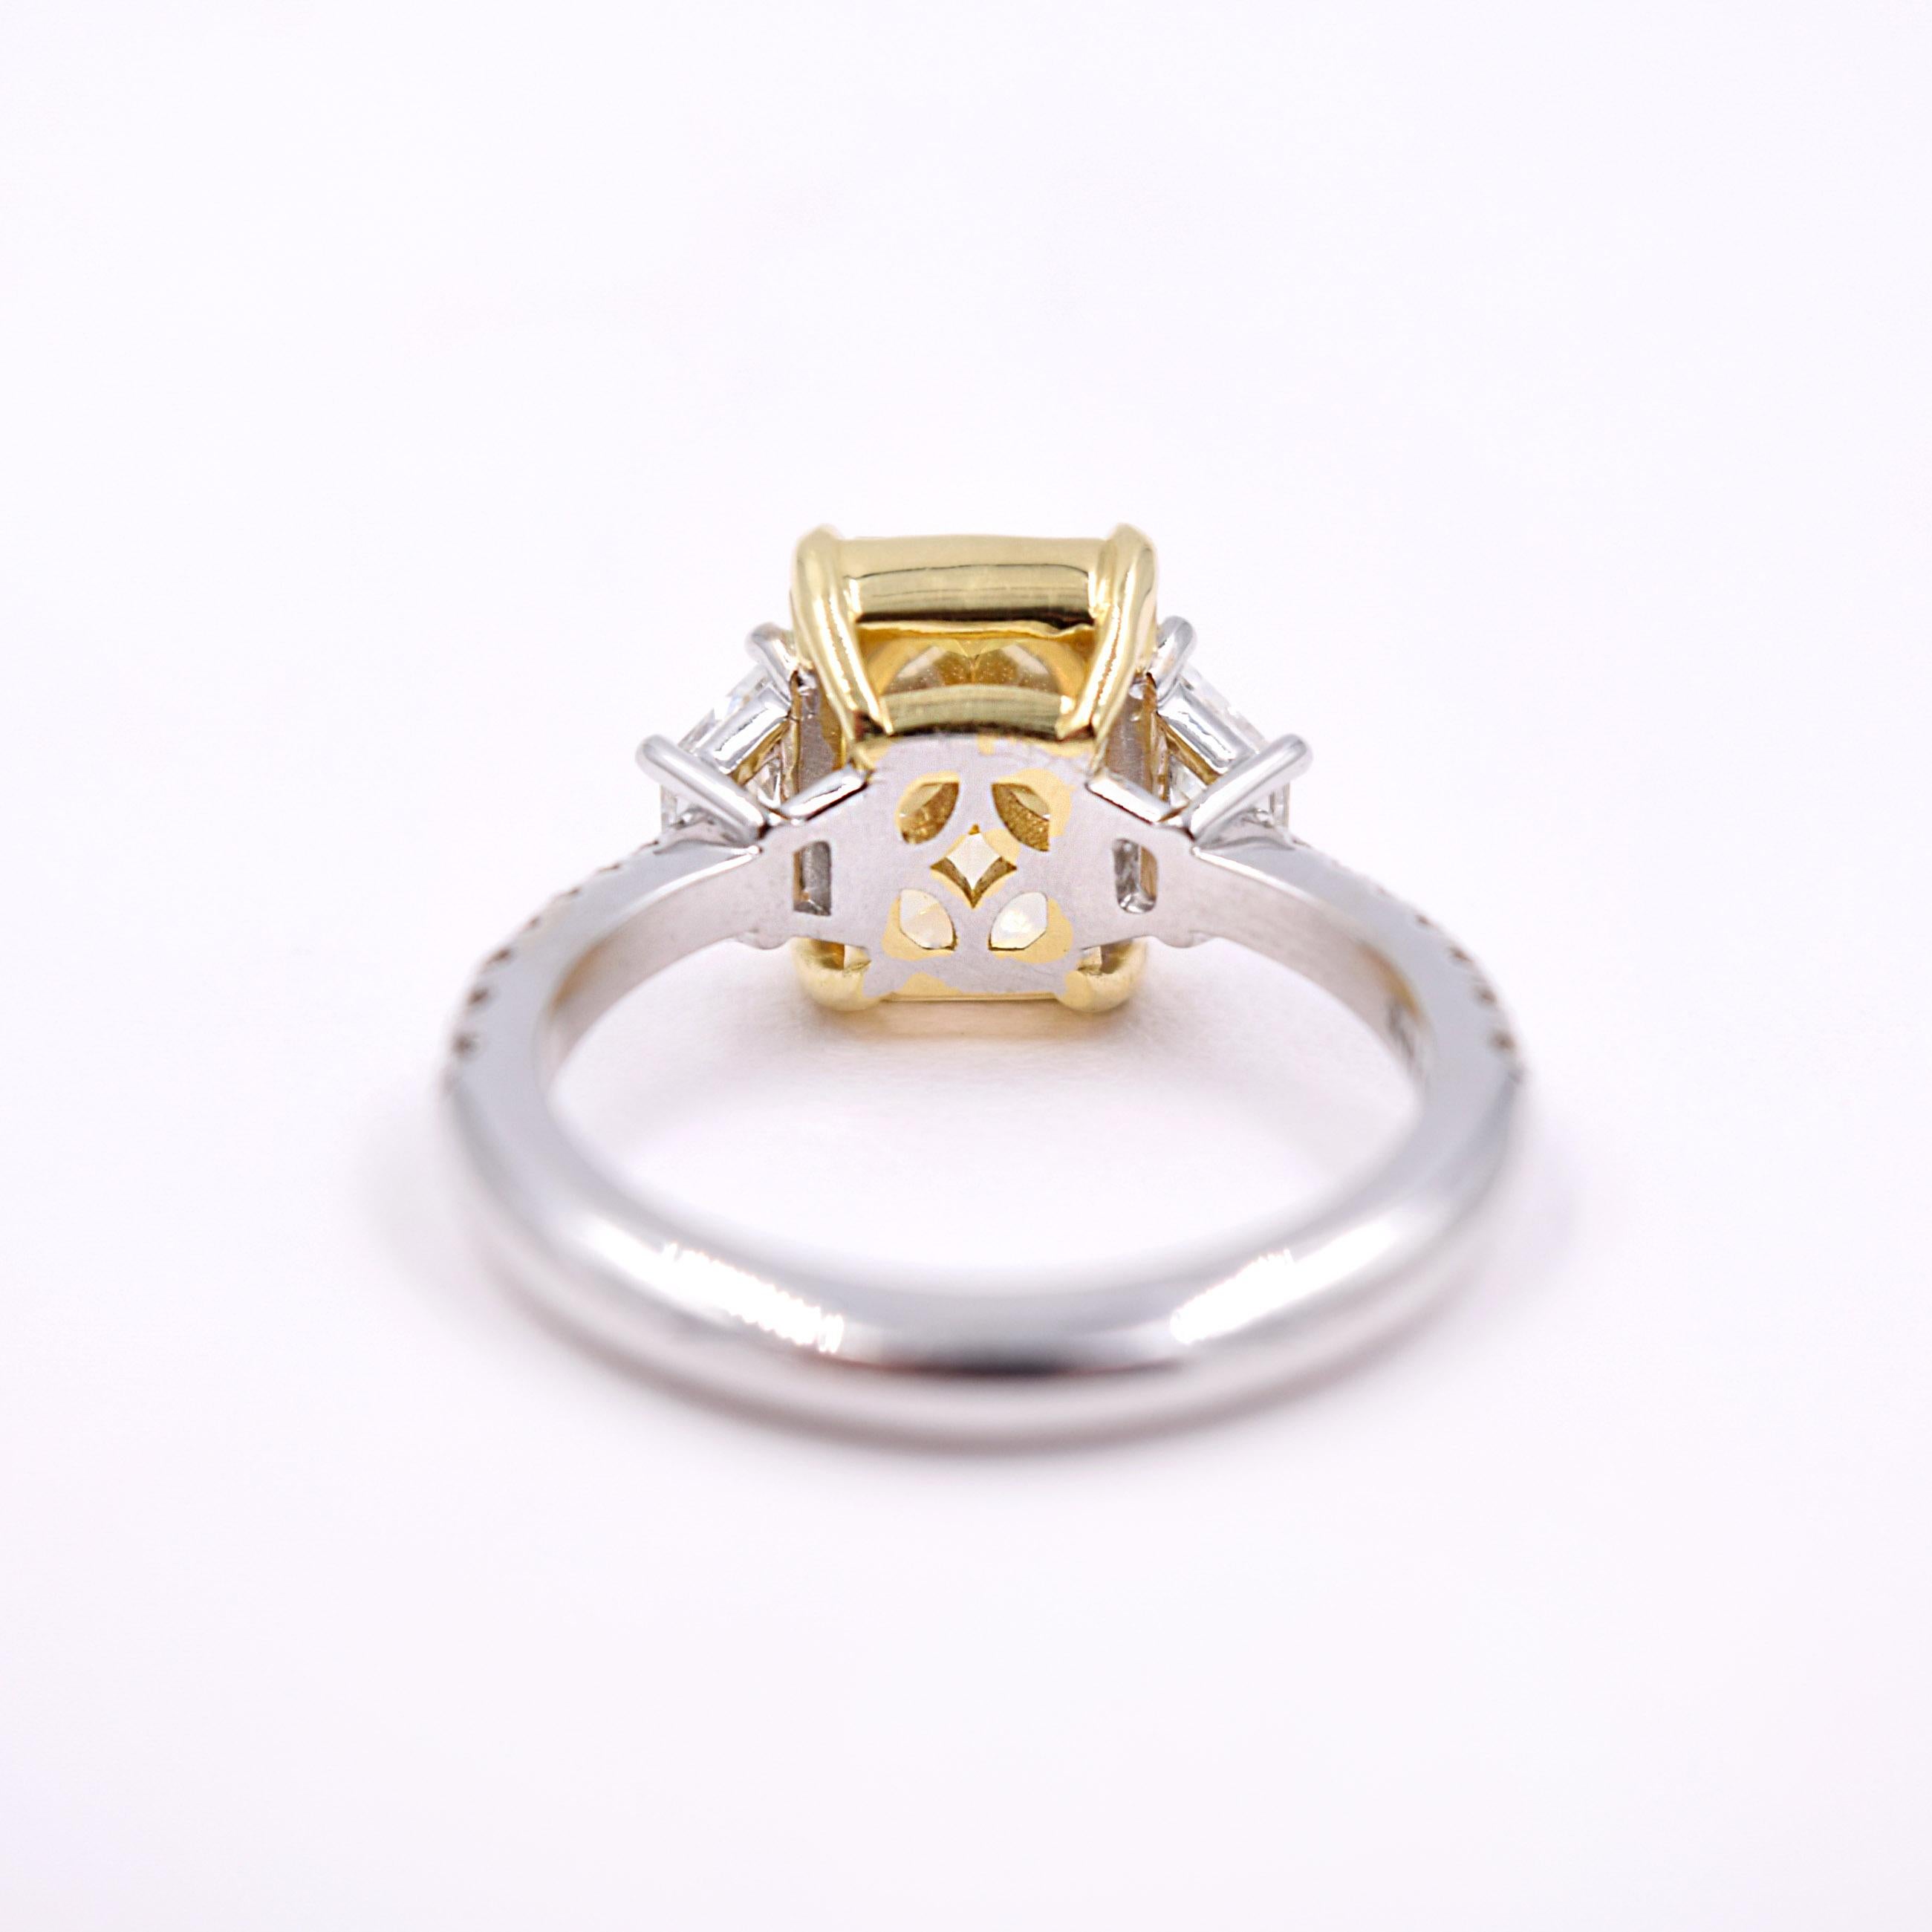 Contemporary GIA Certified 3 Carat Fancy Yellow Diamond Ring in 18K White and Yellow Gold For Sale